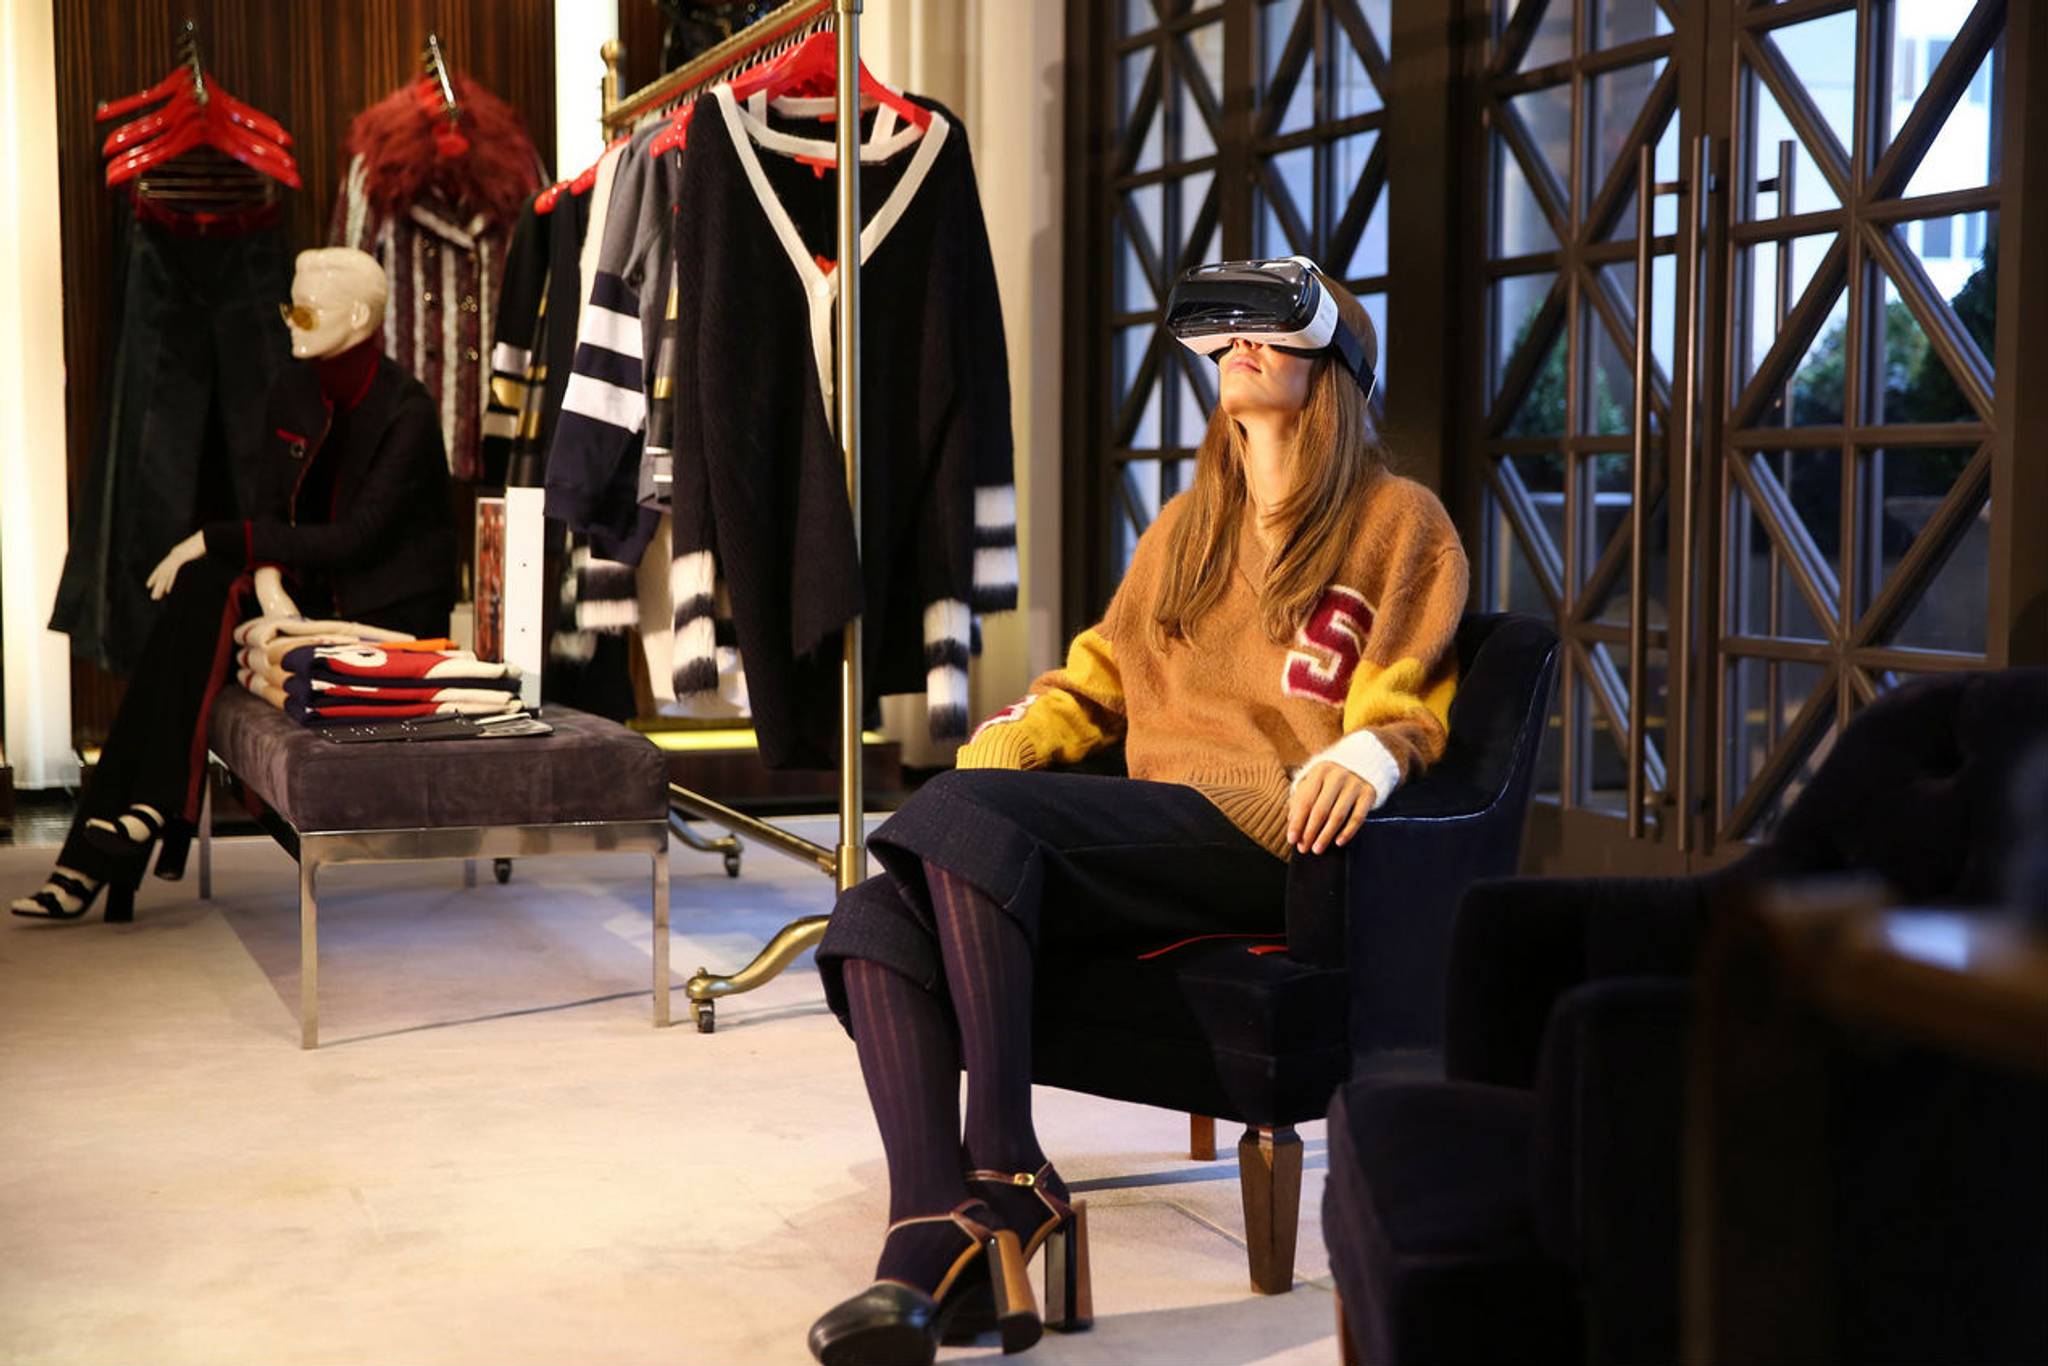 Tommy Hilfiger offers customers v-commerce